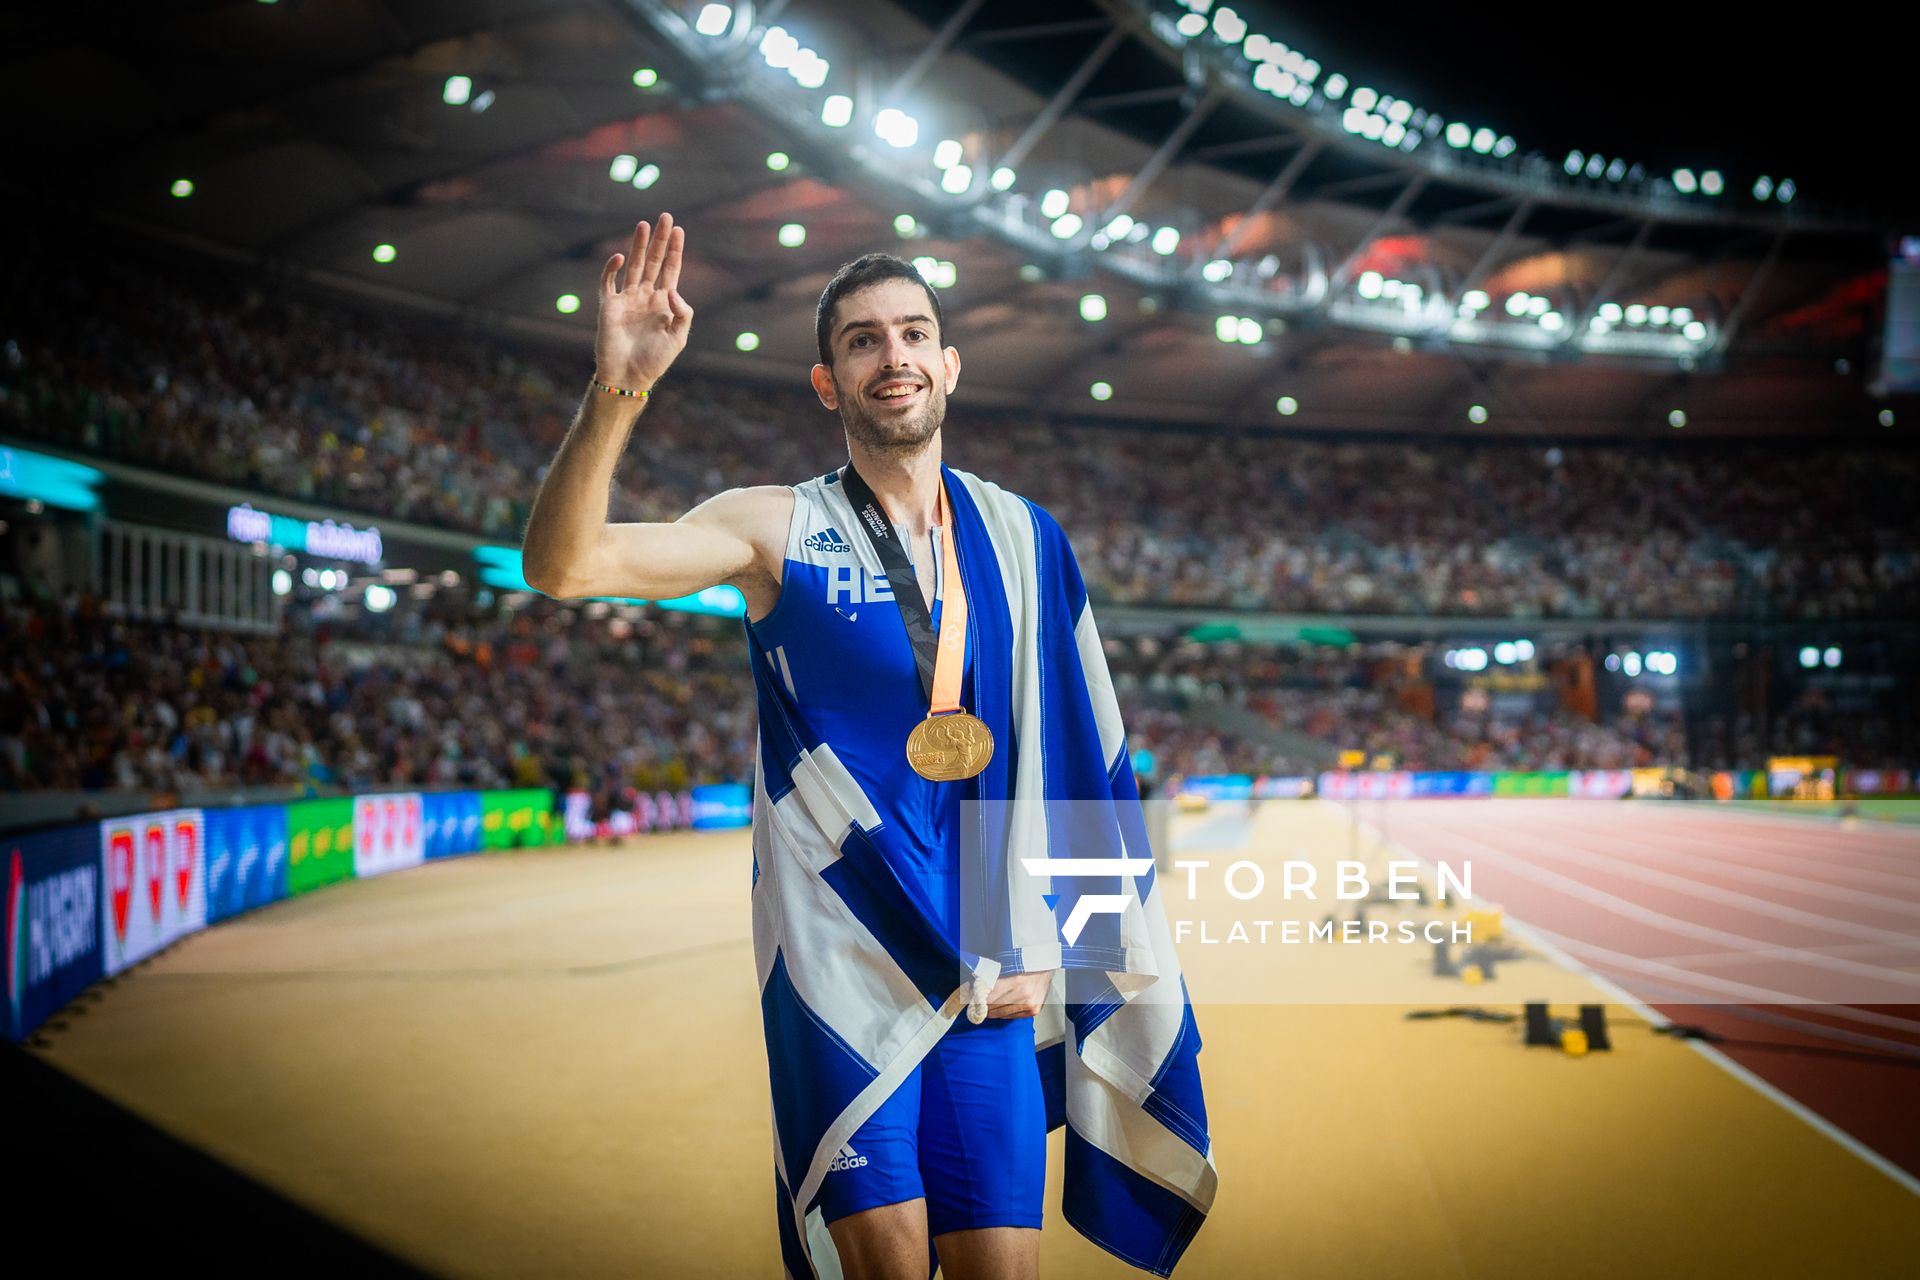 Miltiadis Tentoglou (GRE/Greece) during the Long Jump Final on Day 6 of the World Athletics Championships Budapest 23 at the National Athletics Centre in Budapest, Hungary on August 24, 2023.